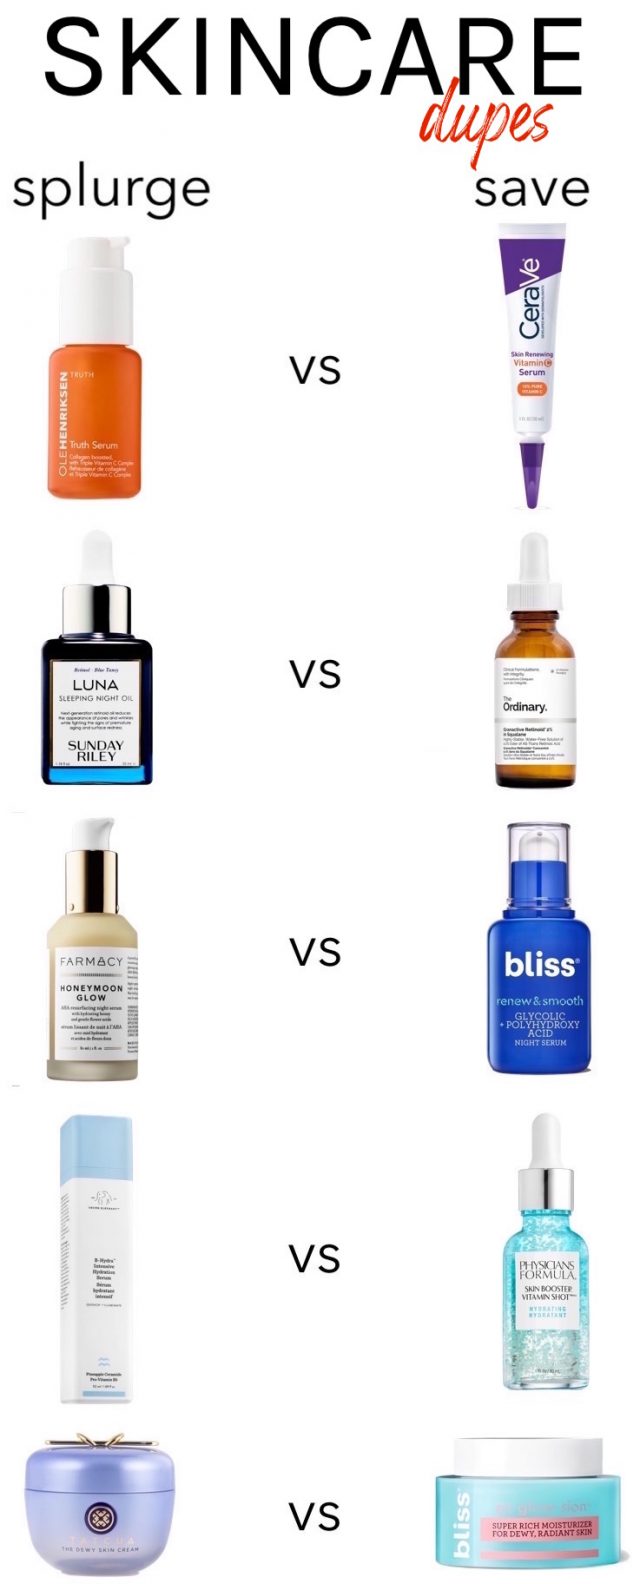 10 Cheaper Skincare Dupes For Expensive Products (That Actually Work!)